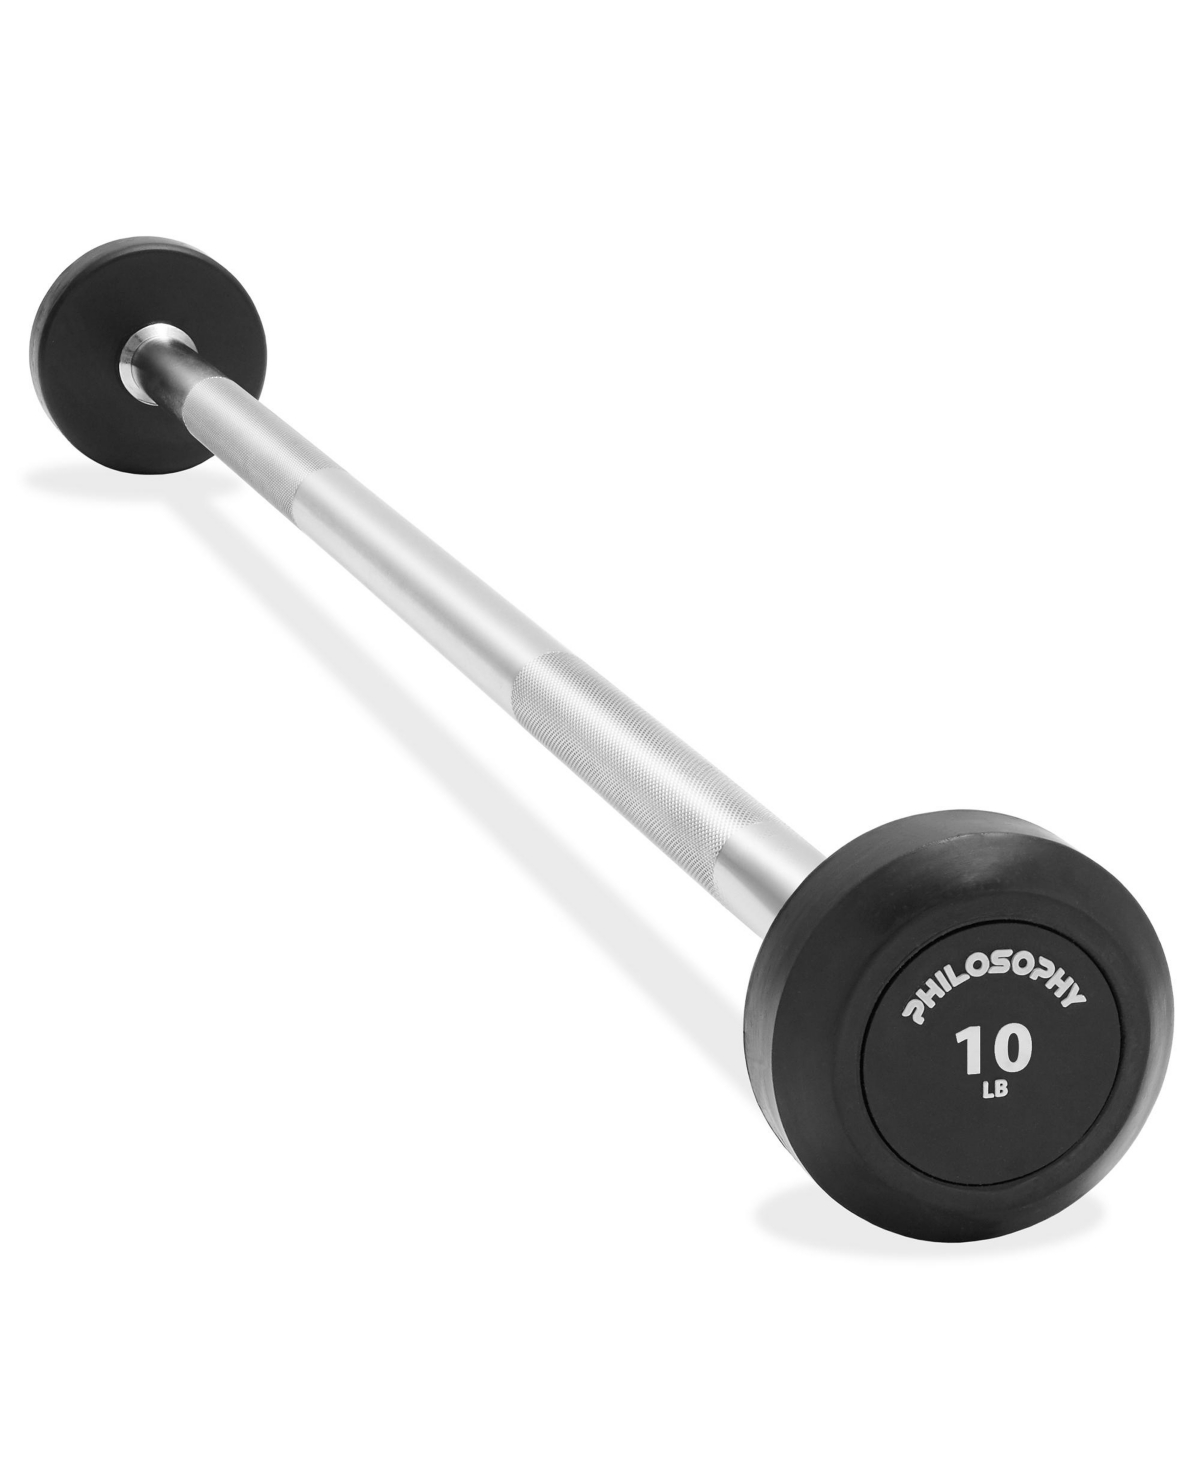 Rubber Fixed Barbell, 10 Lb Pre-Loaded Weight Straight Bar for Strength Training & Weightlifting - Black